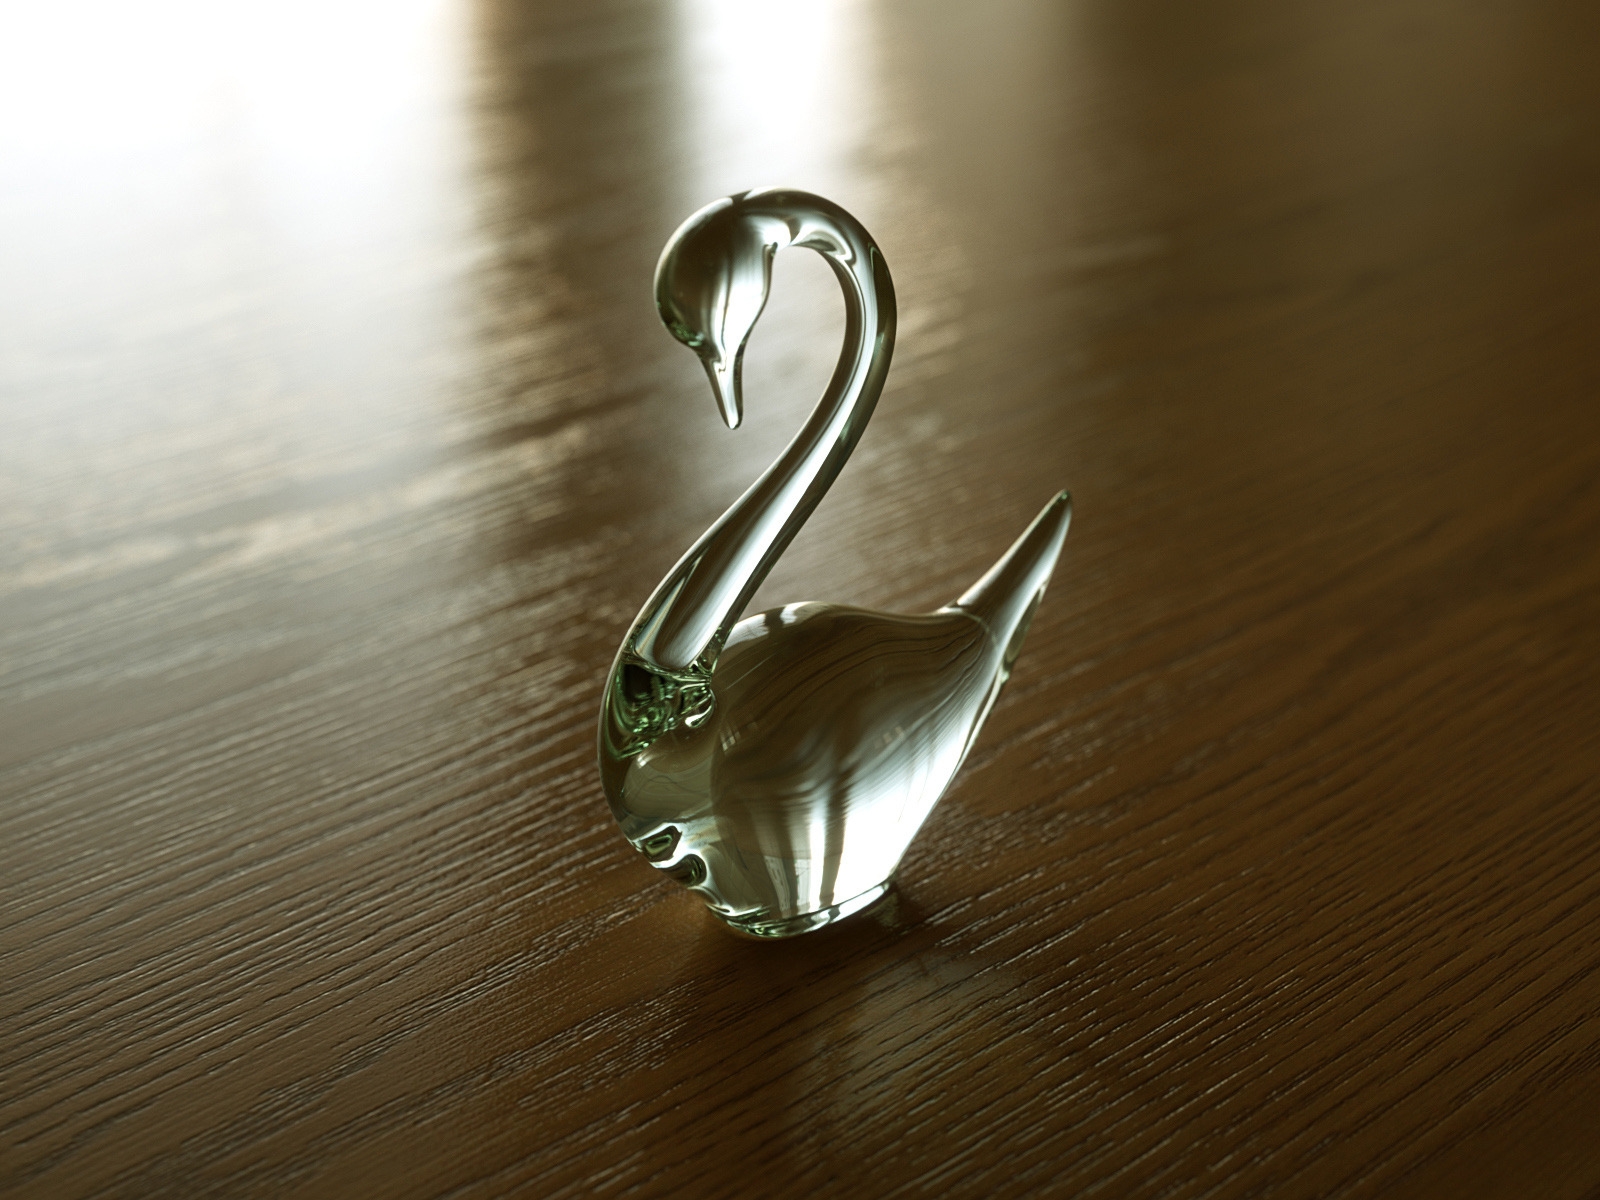 Glass Swan for 1600 x 1200 resolution